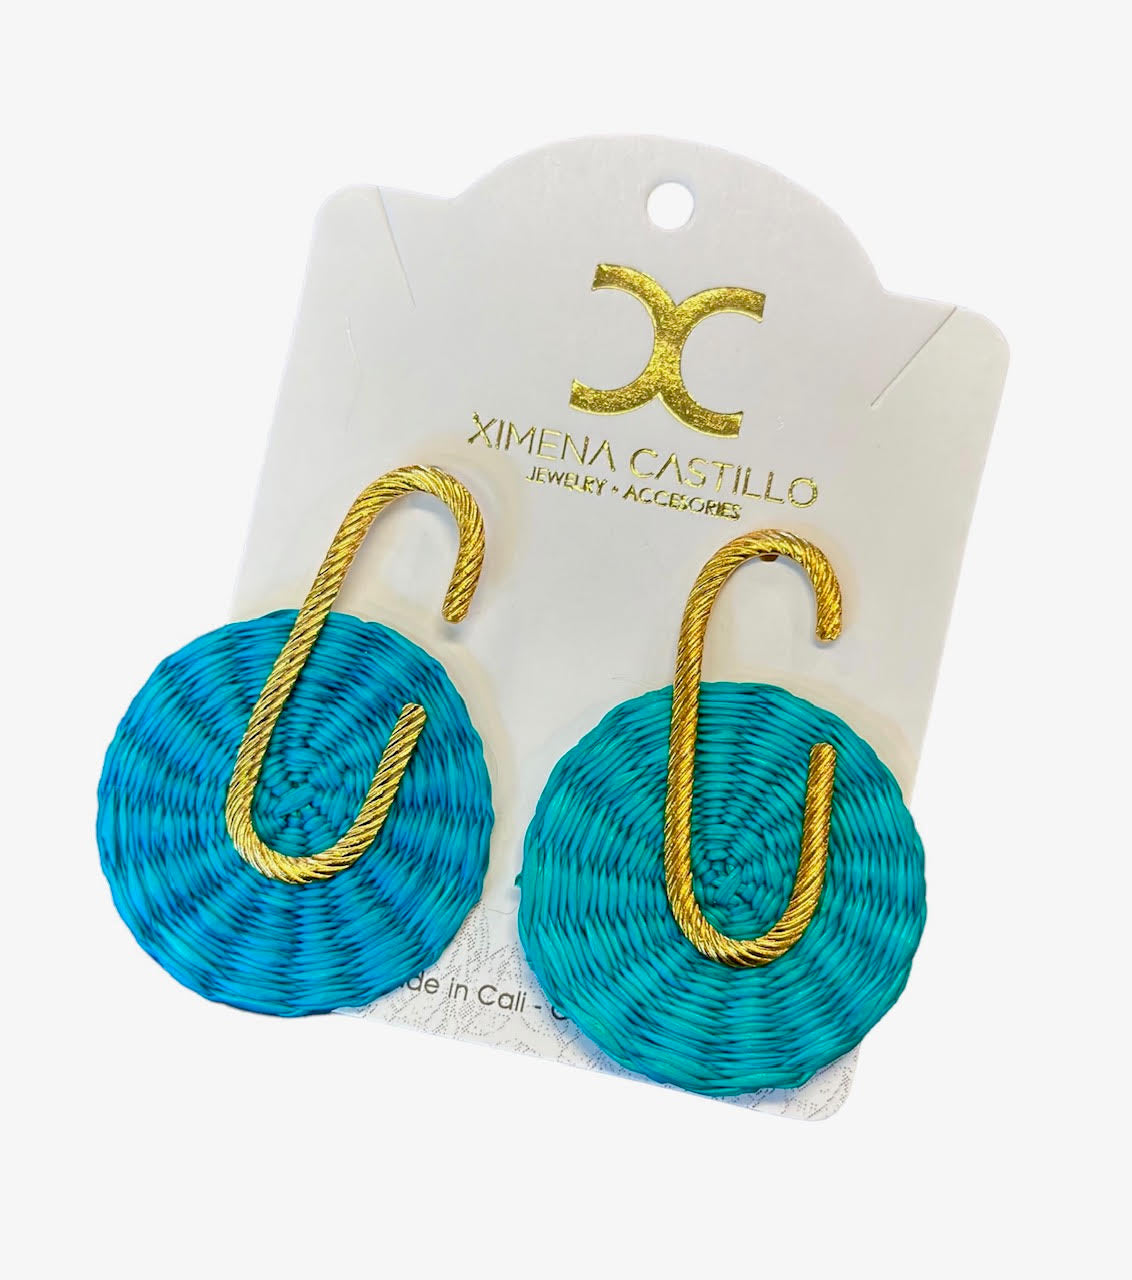 Palm Earring with Lockshape in teal by Ximena Castillo